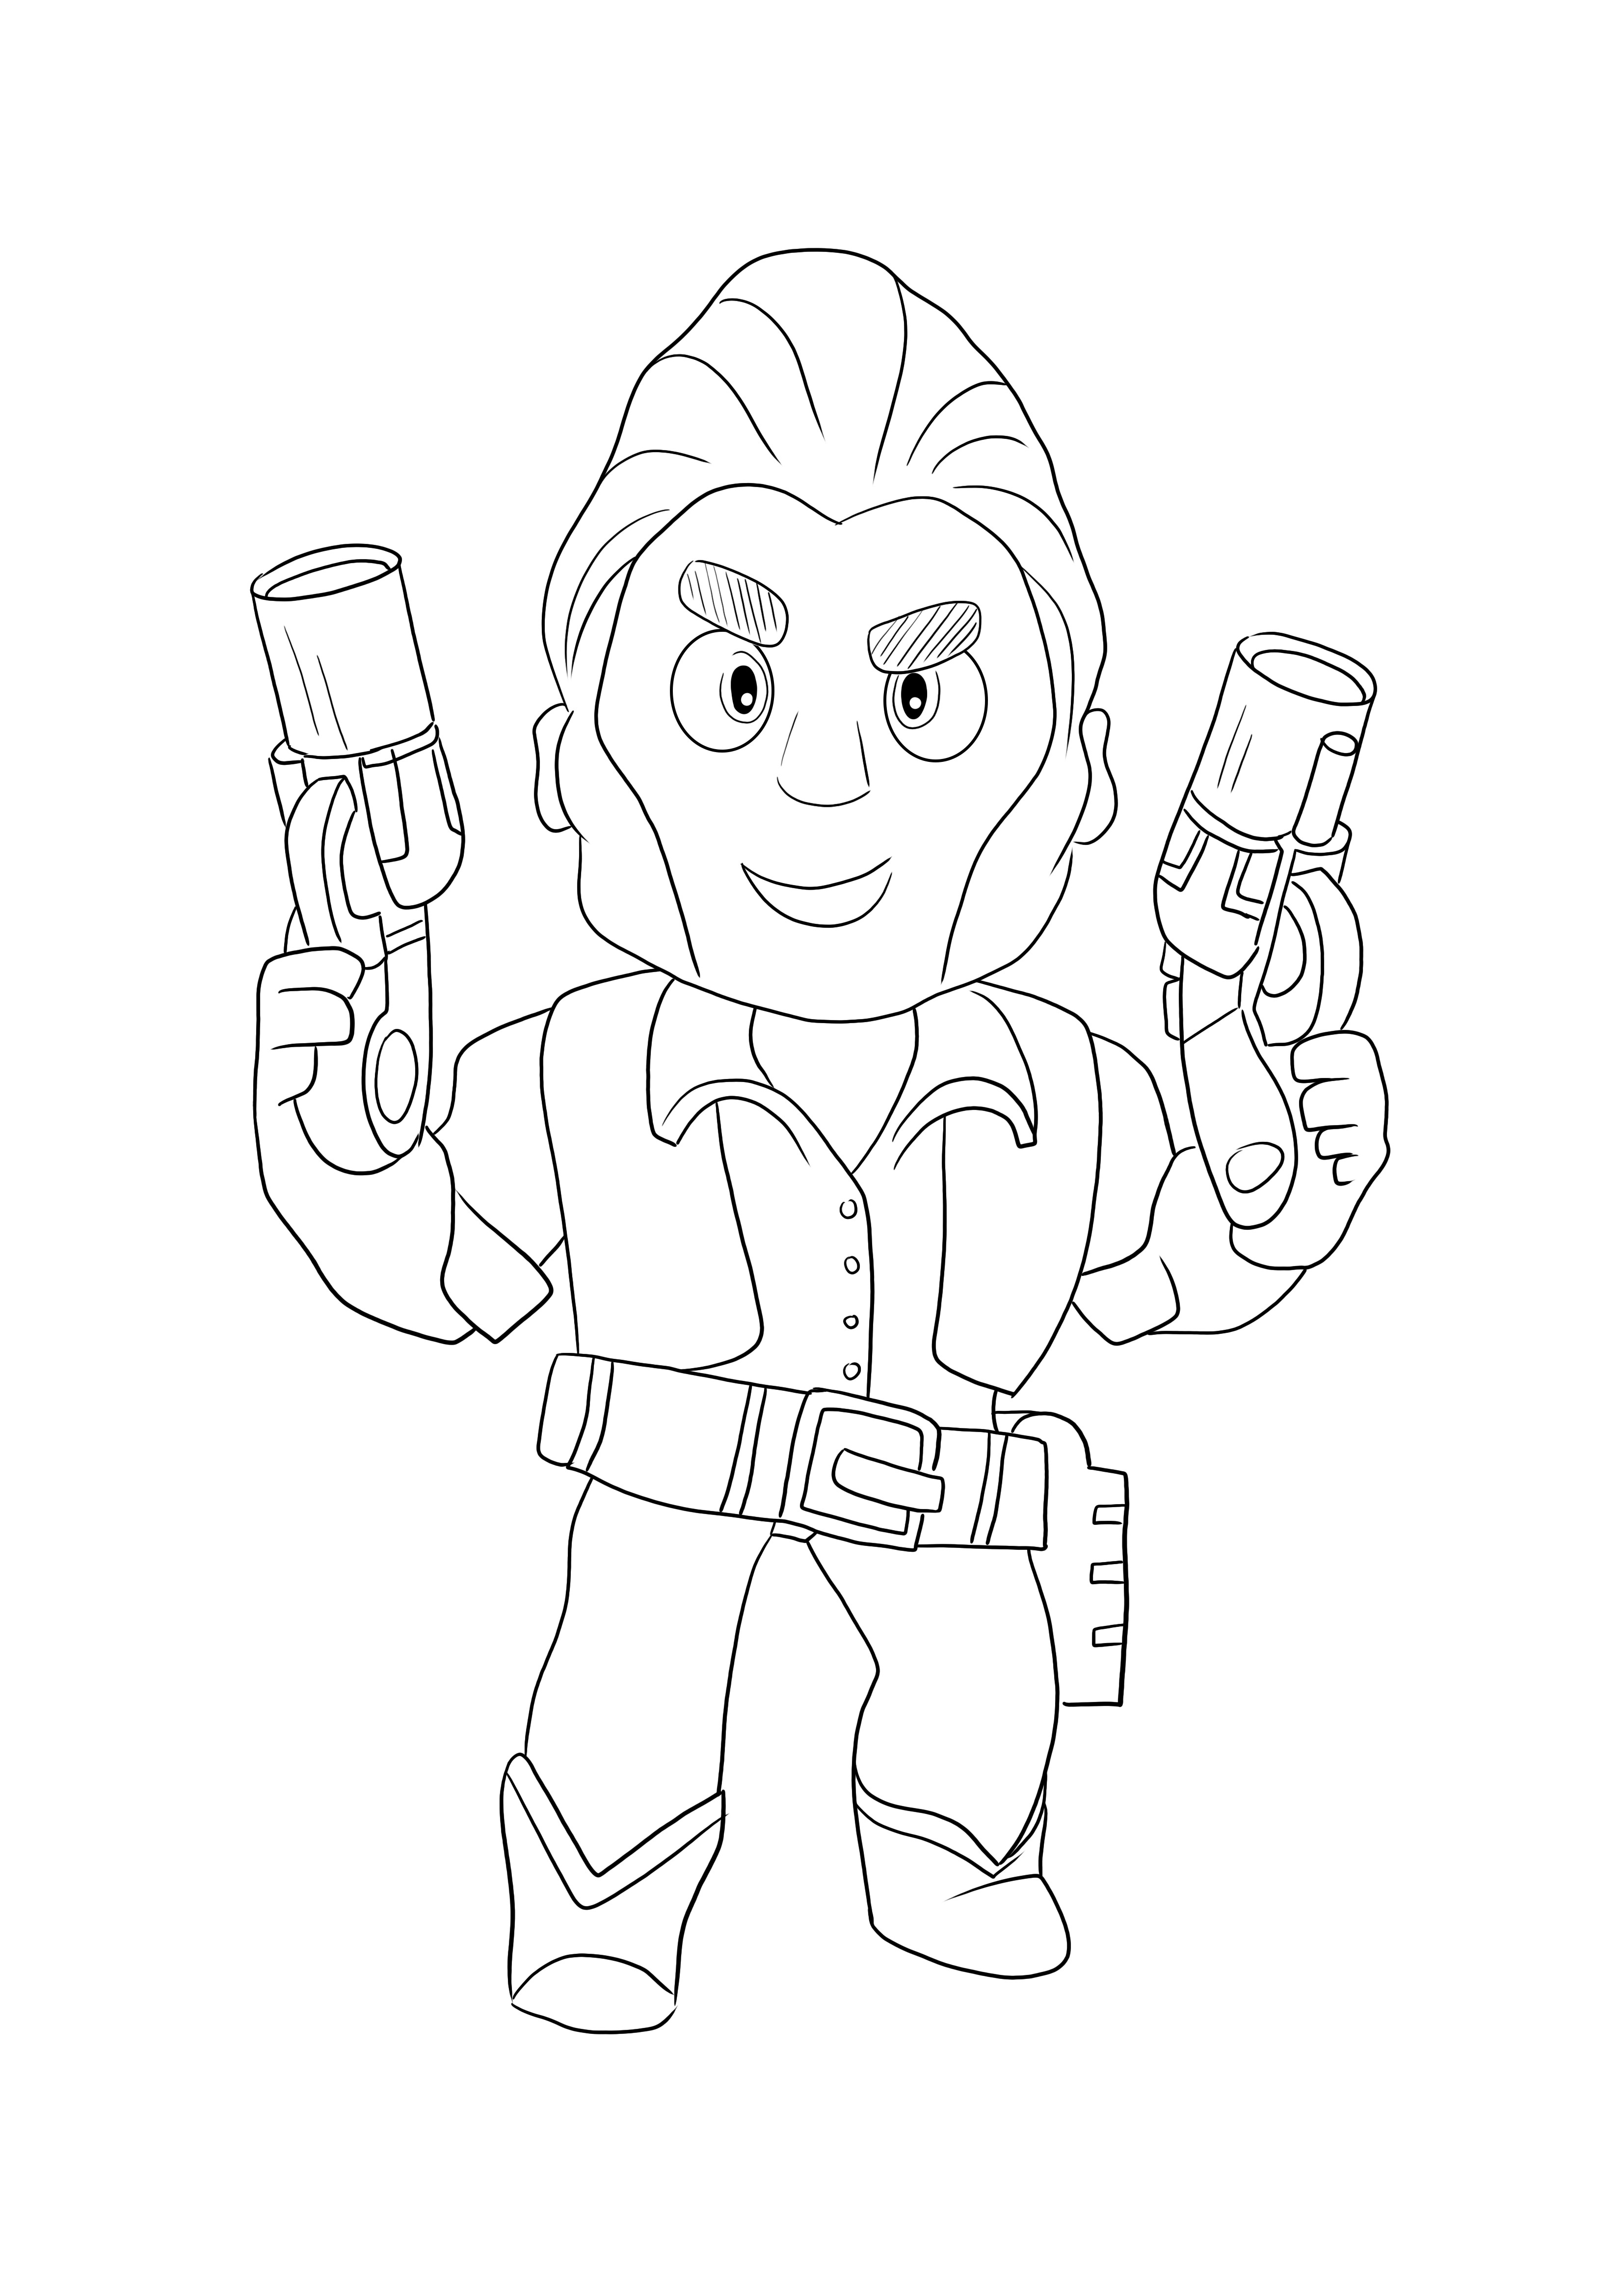 Colt from Brawl Stars video game for free coloring image